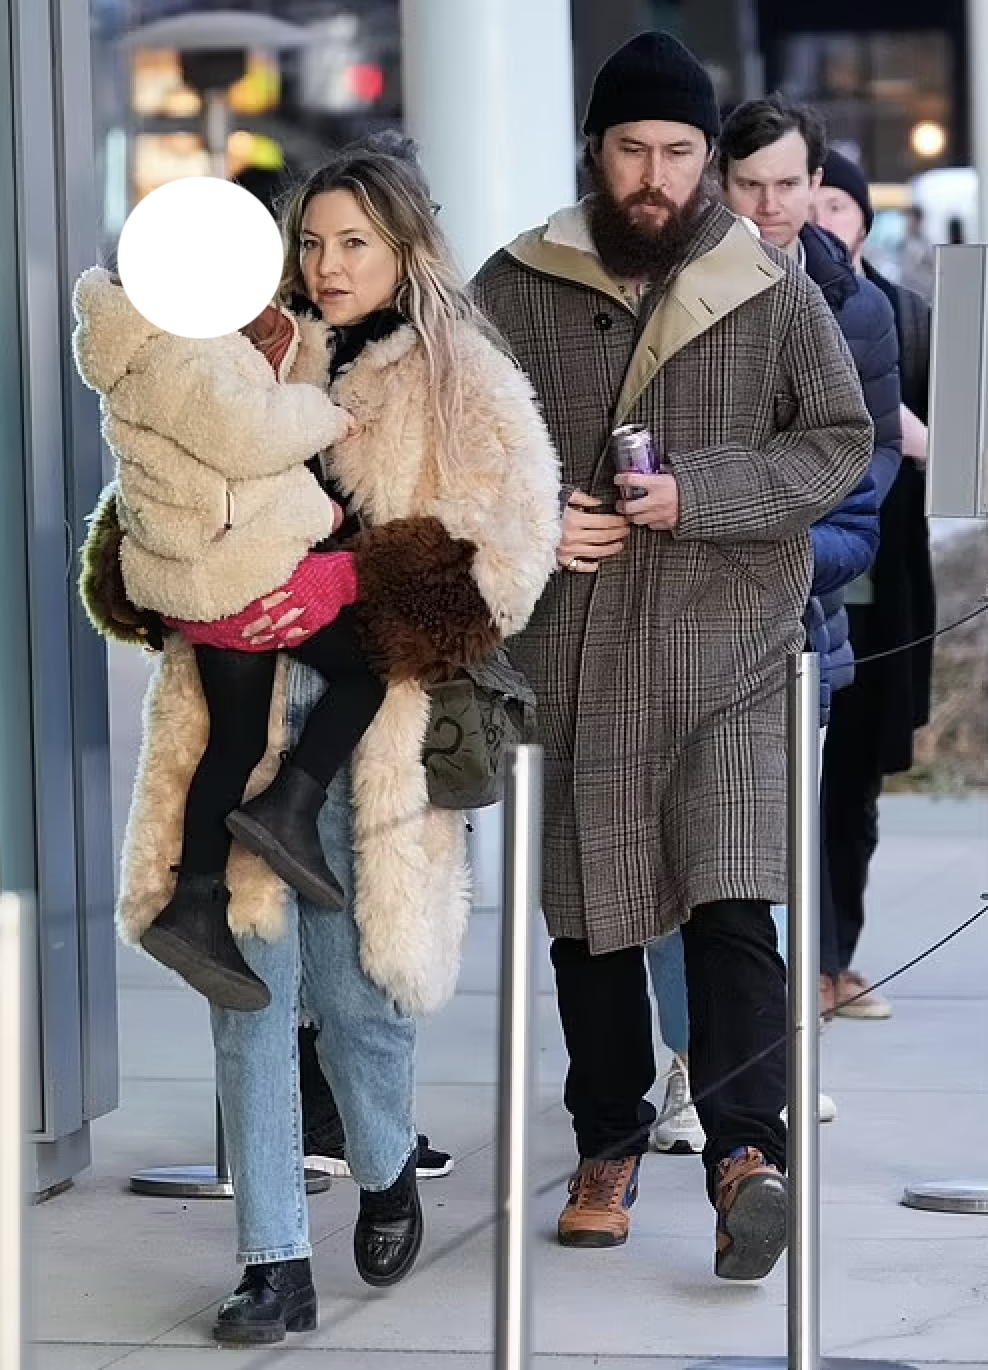 Kate Hudson wore a furry white coat while taking her daughter to the Whitney Museum in New York City with her boyfriend Danny Fujikawa.